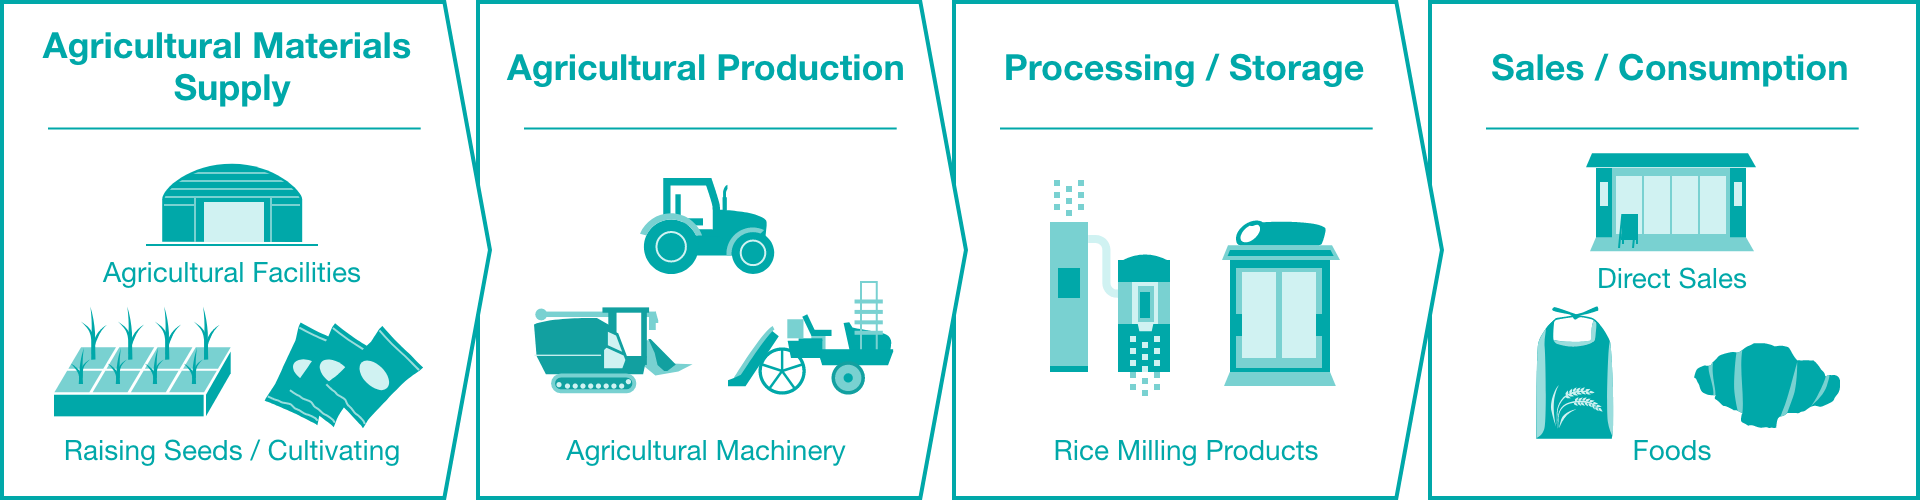 Agricultural Materials Supply - Agricultural Production - Processing / Storage - Sales / Consumption